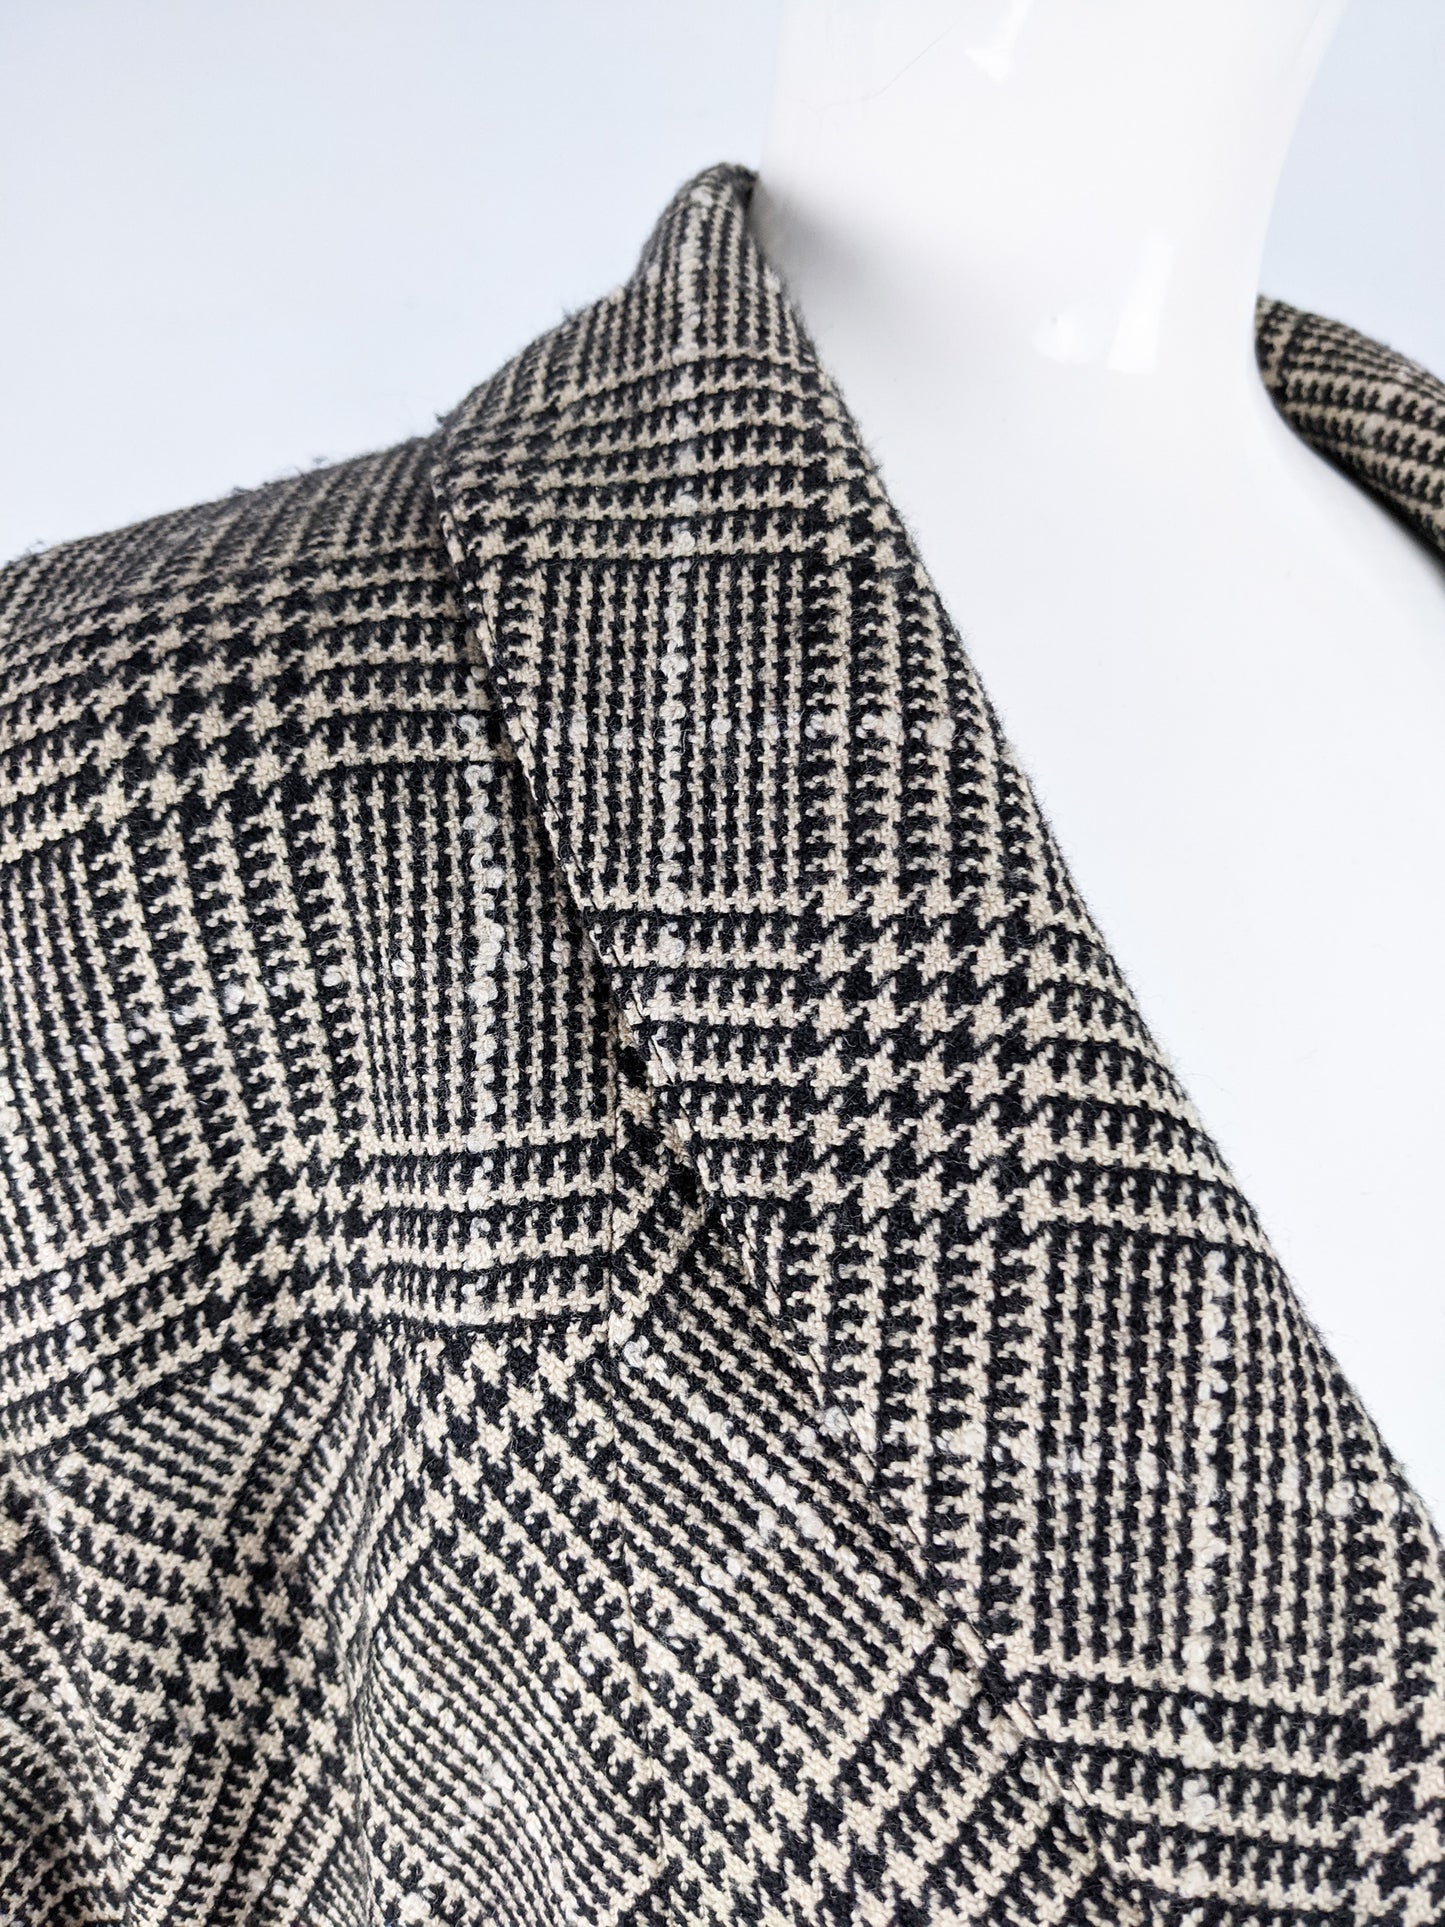 Valentino Vintage Womens Houndstooth Wool & Cashmere Jacket, 1980s